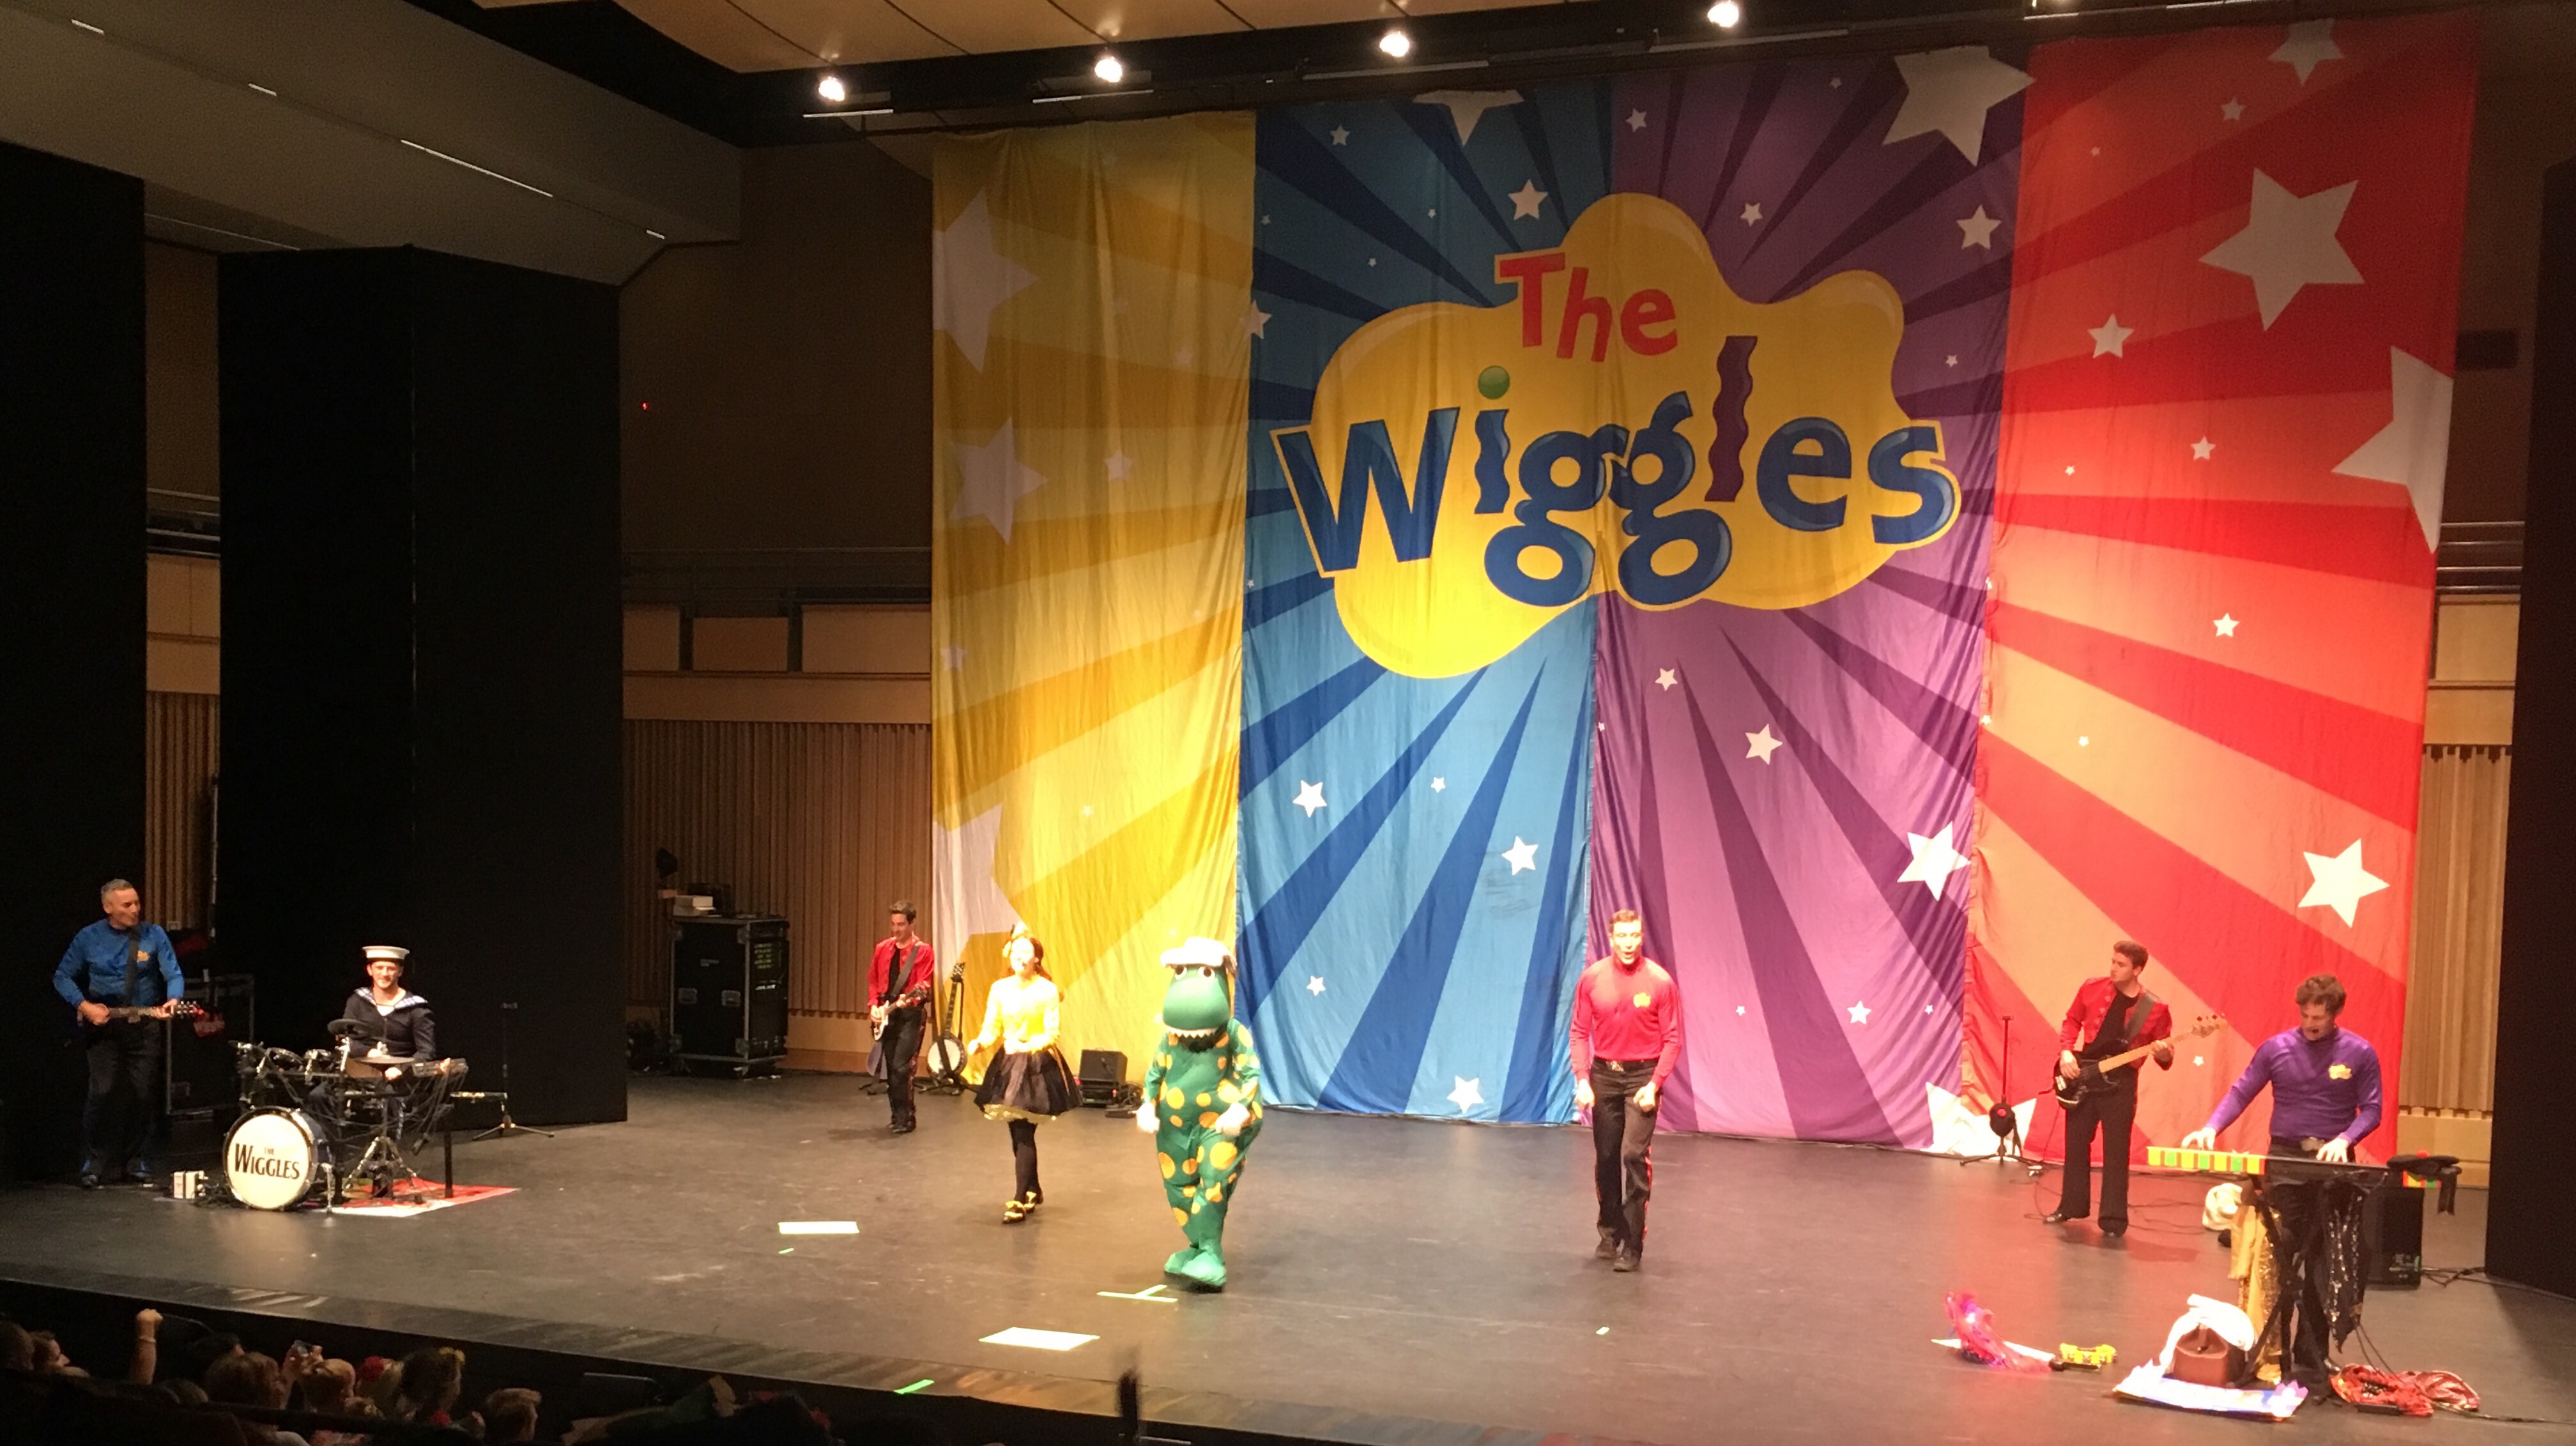 A first theatre trip to see The Wiggles!